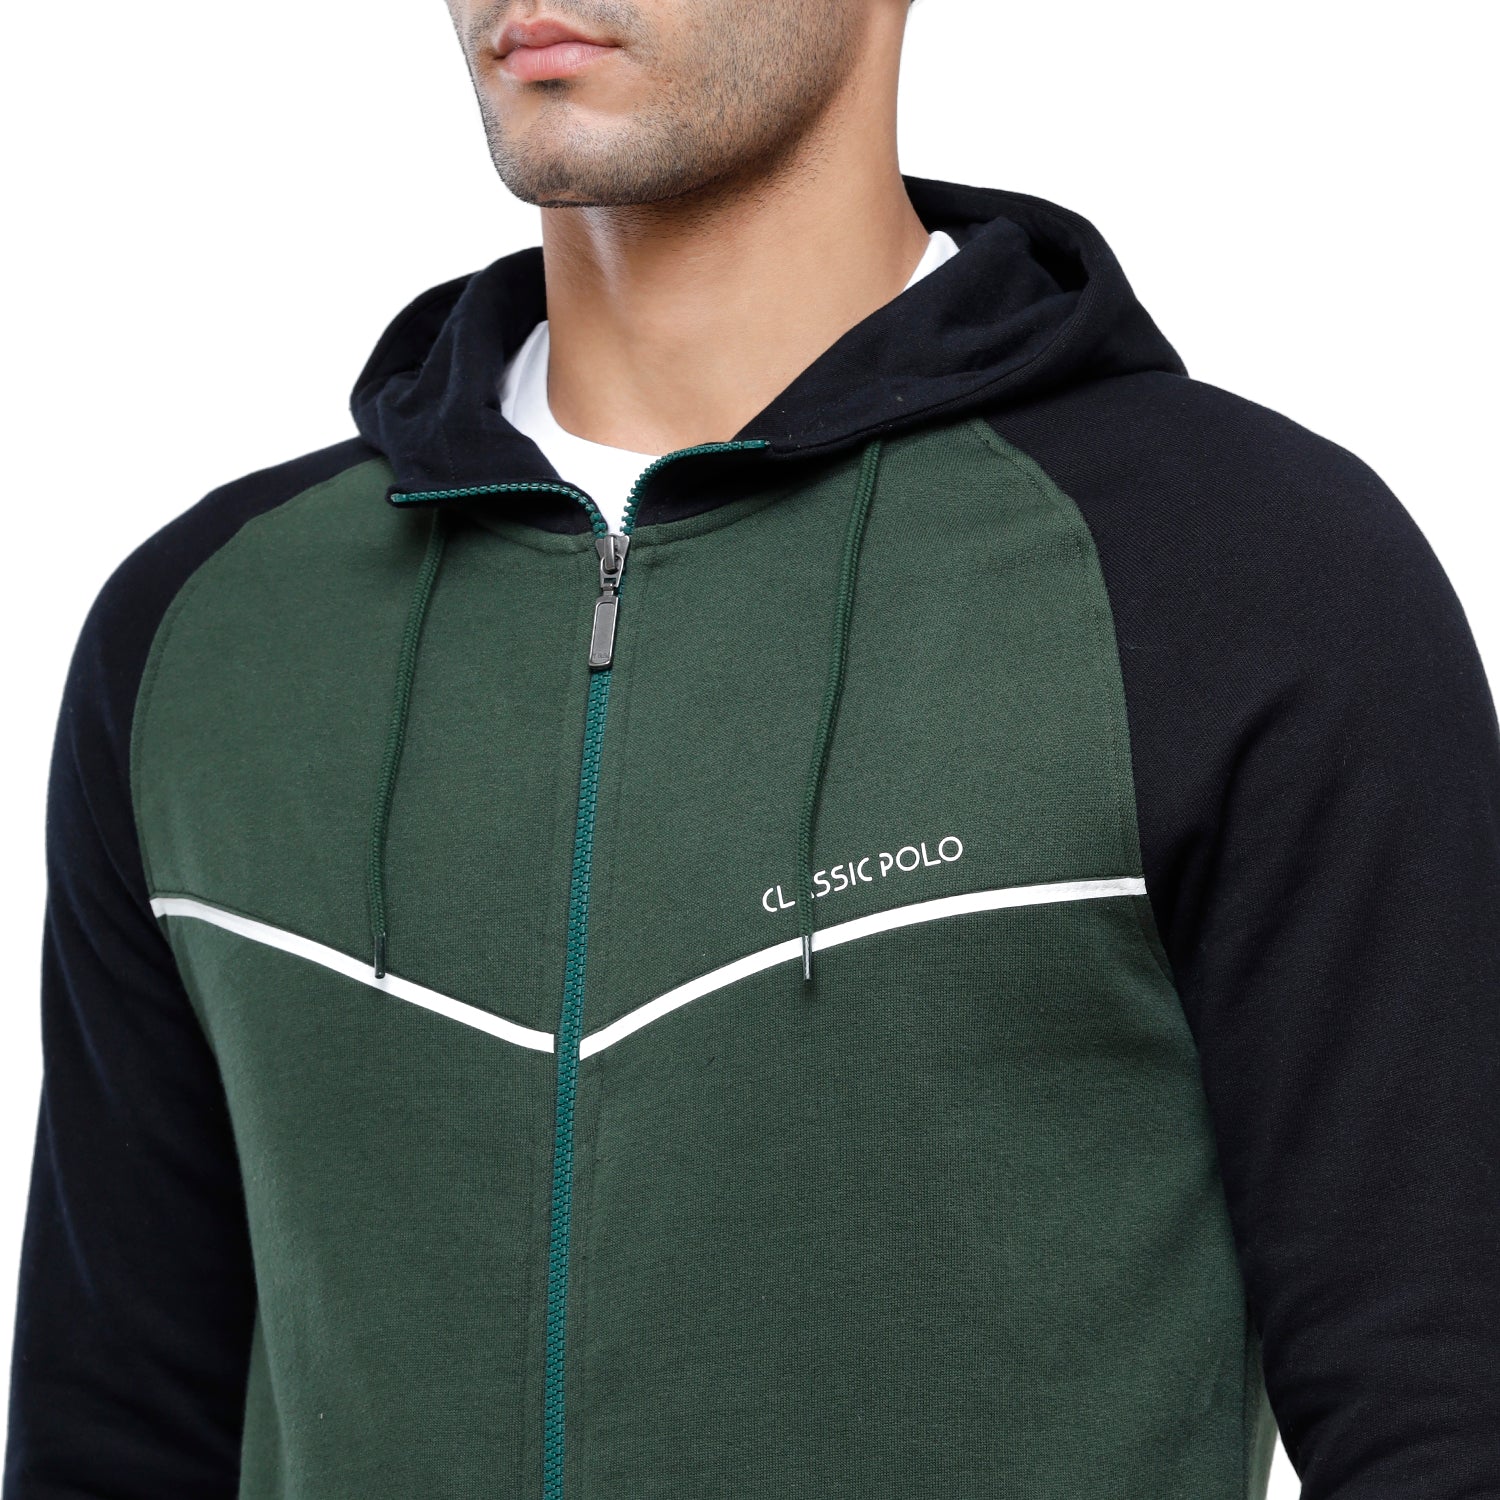 Classic Polo Men's Color Block Full Sleeve Green & Black Hooded Sweat Shirt - CPSS-325A Sweat Shirts Classic Polo 